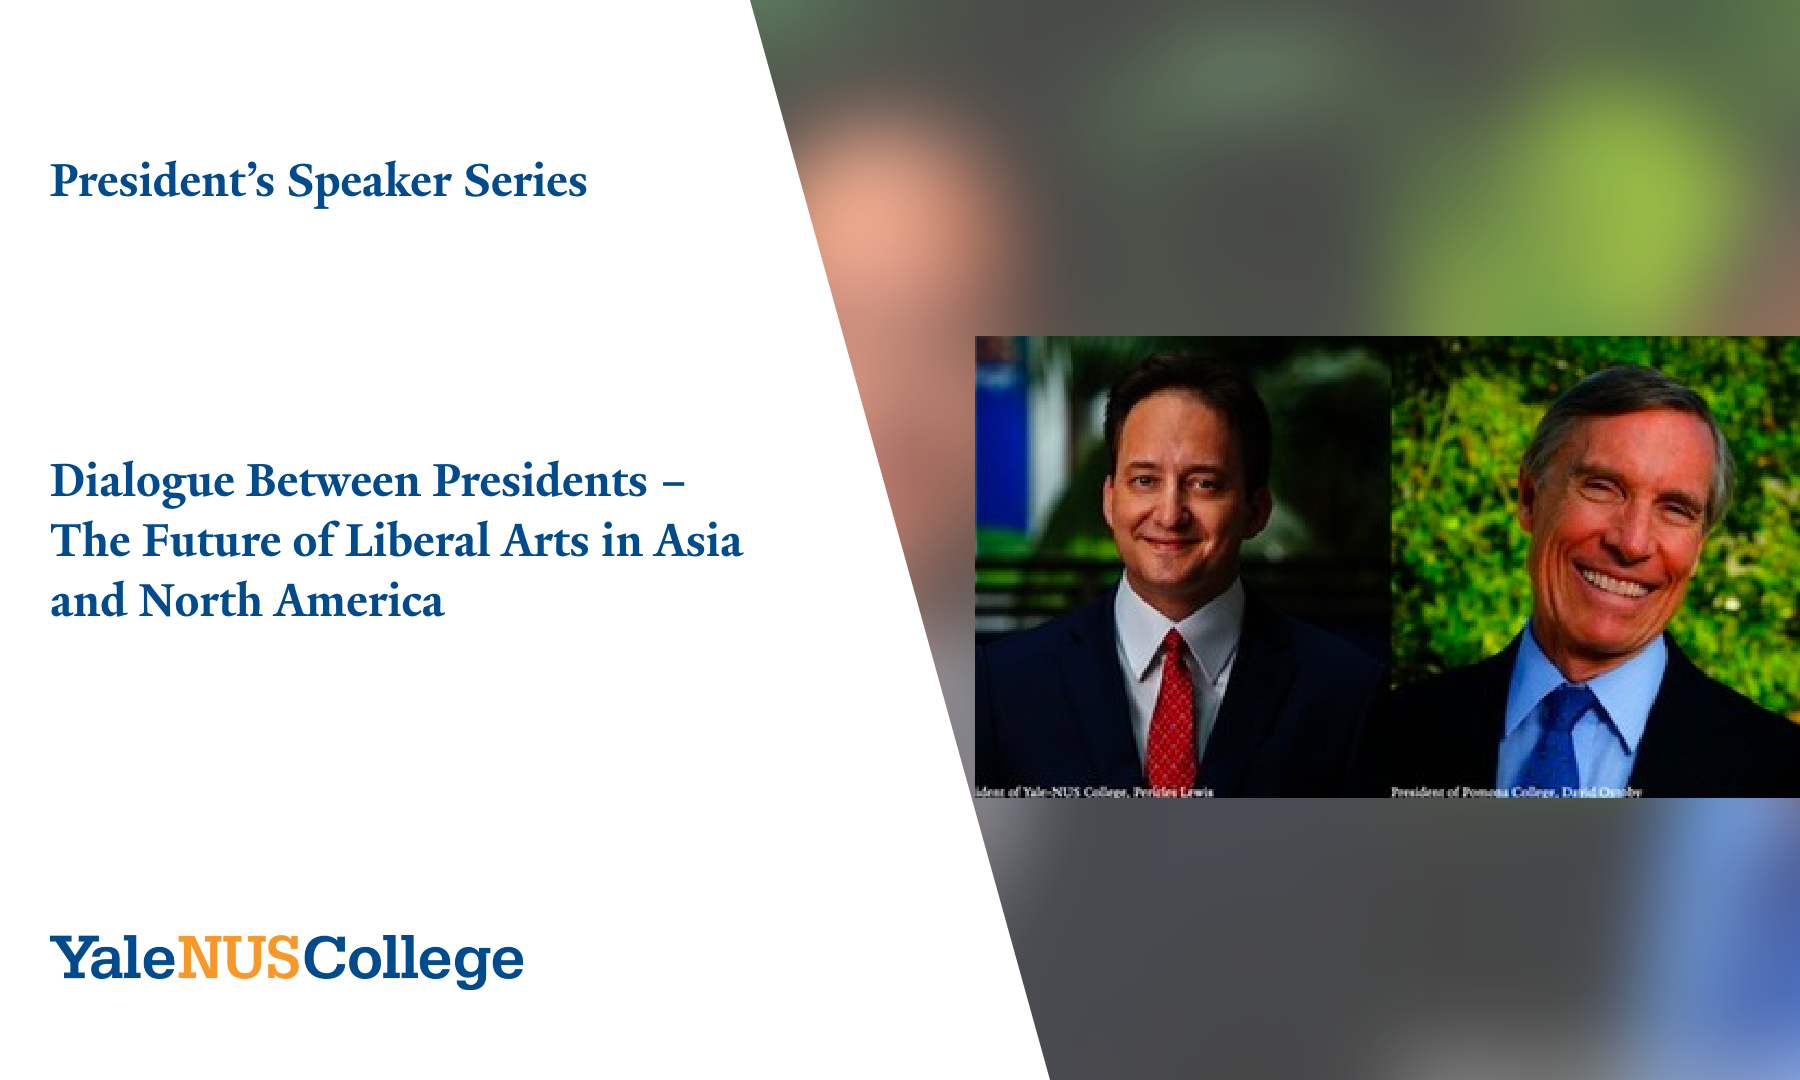 Dialogue Between Presidents - The Future of Liberal Arts in Asia and North America